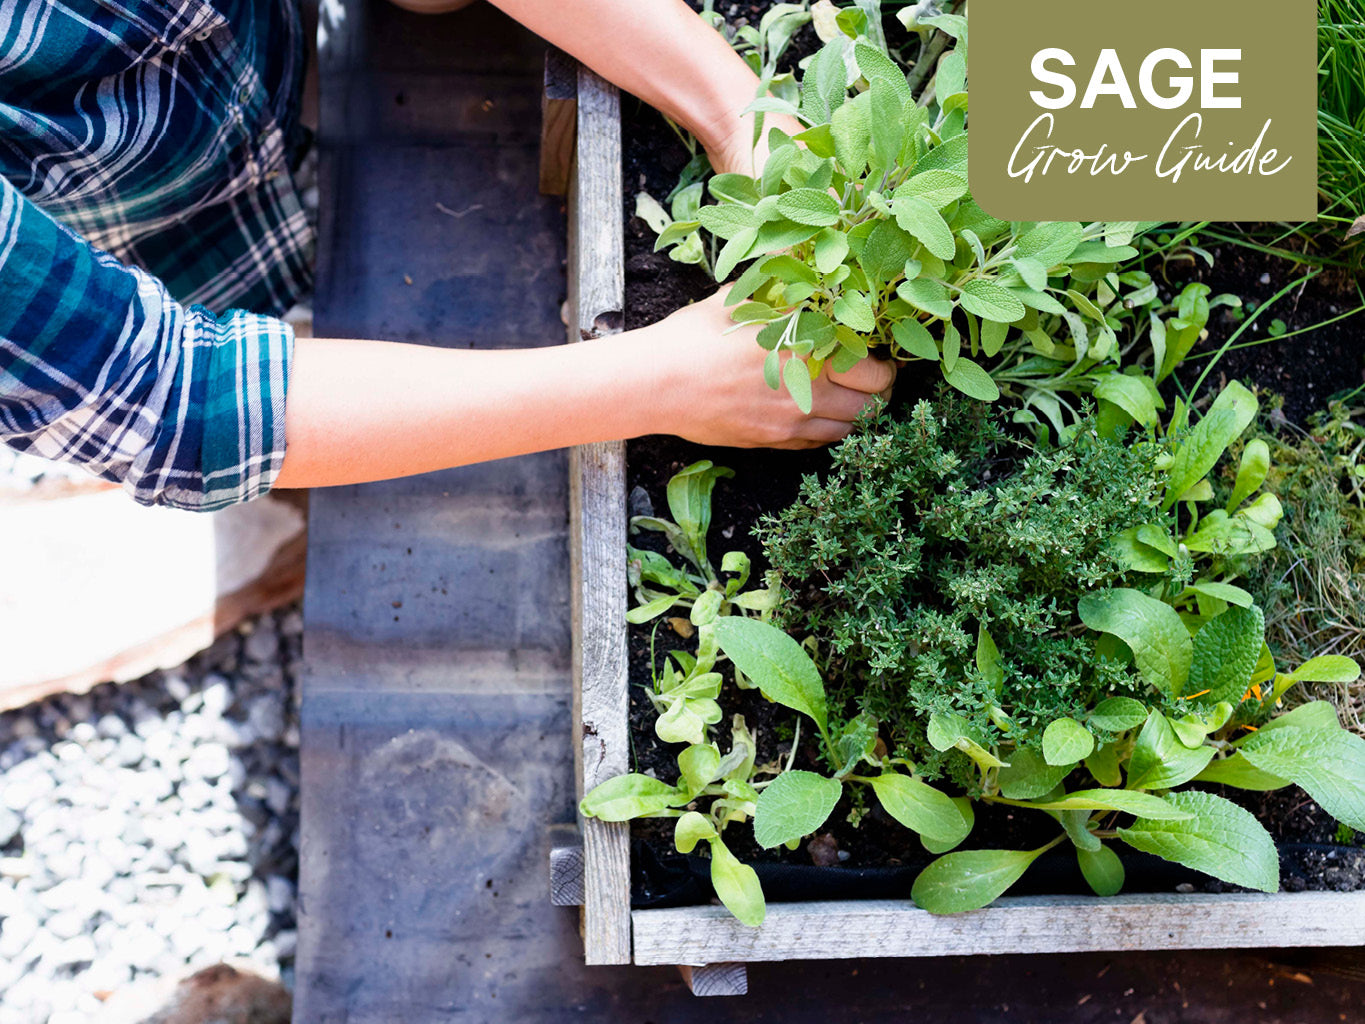 Sage Grow Guide: How to Plant, Grow and Harvest Sage